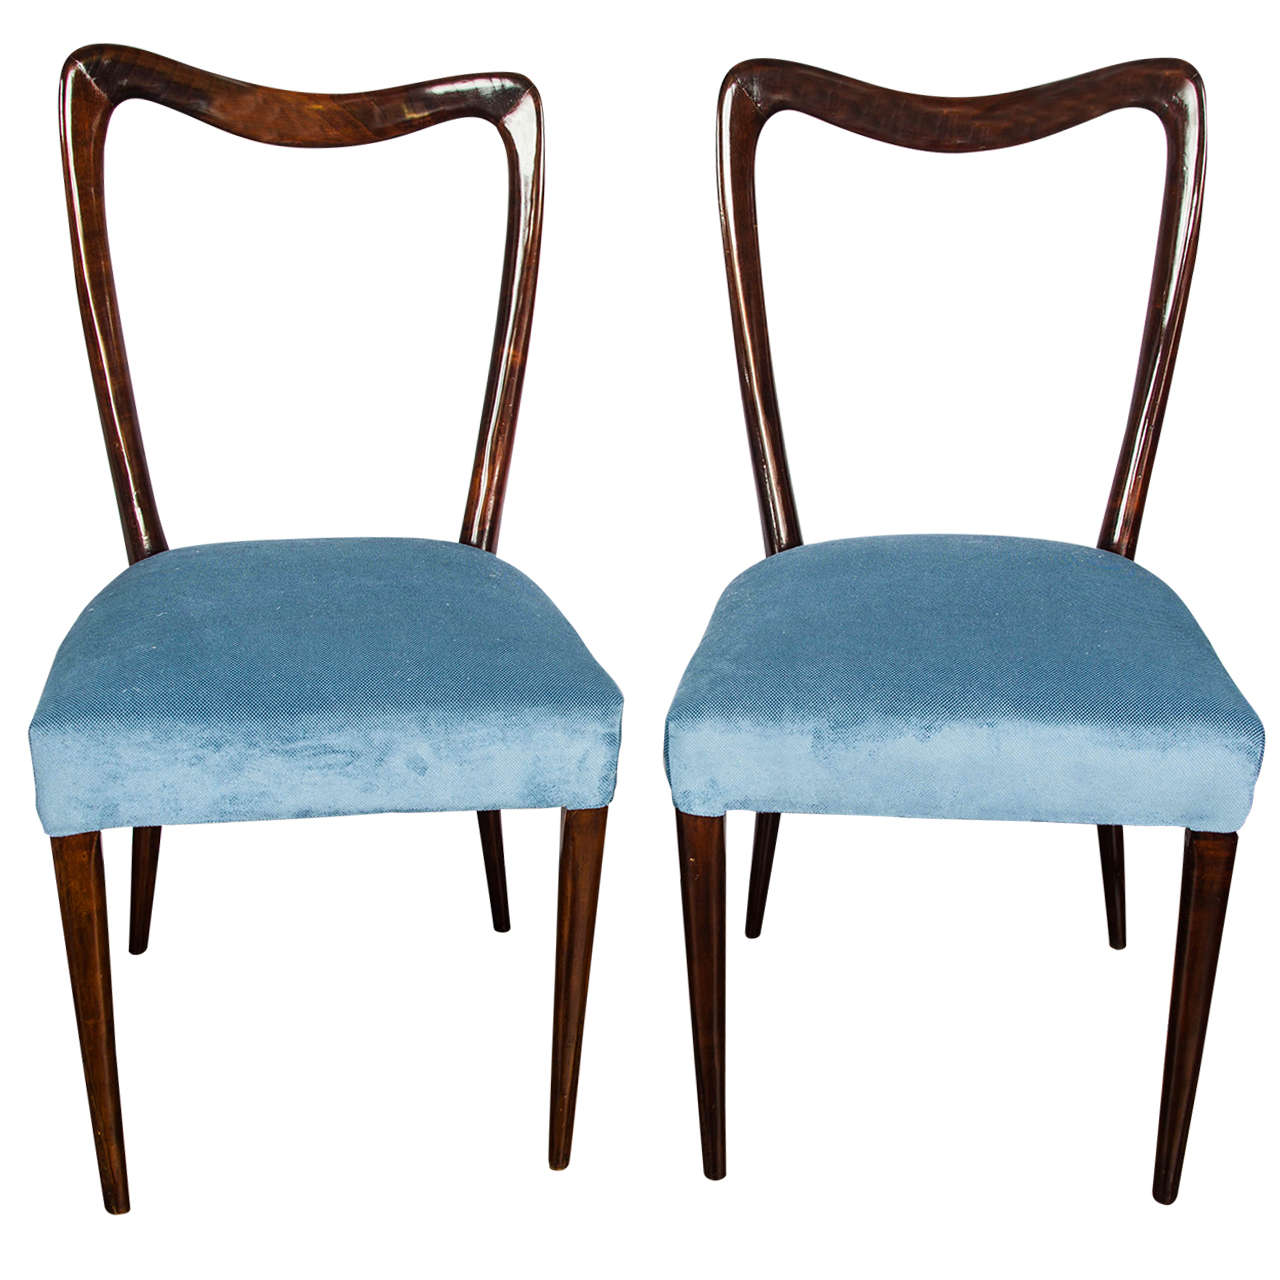 Set of Six 1945-1950 Dining Chairs in the Style of Guglielmo Ulrich